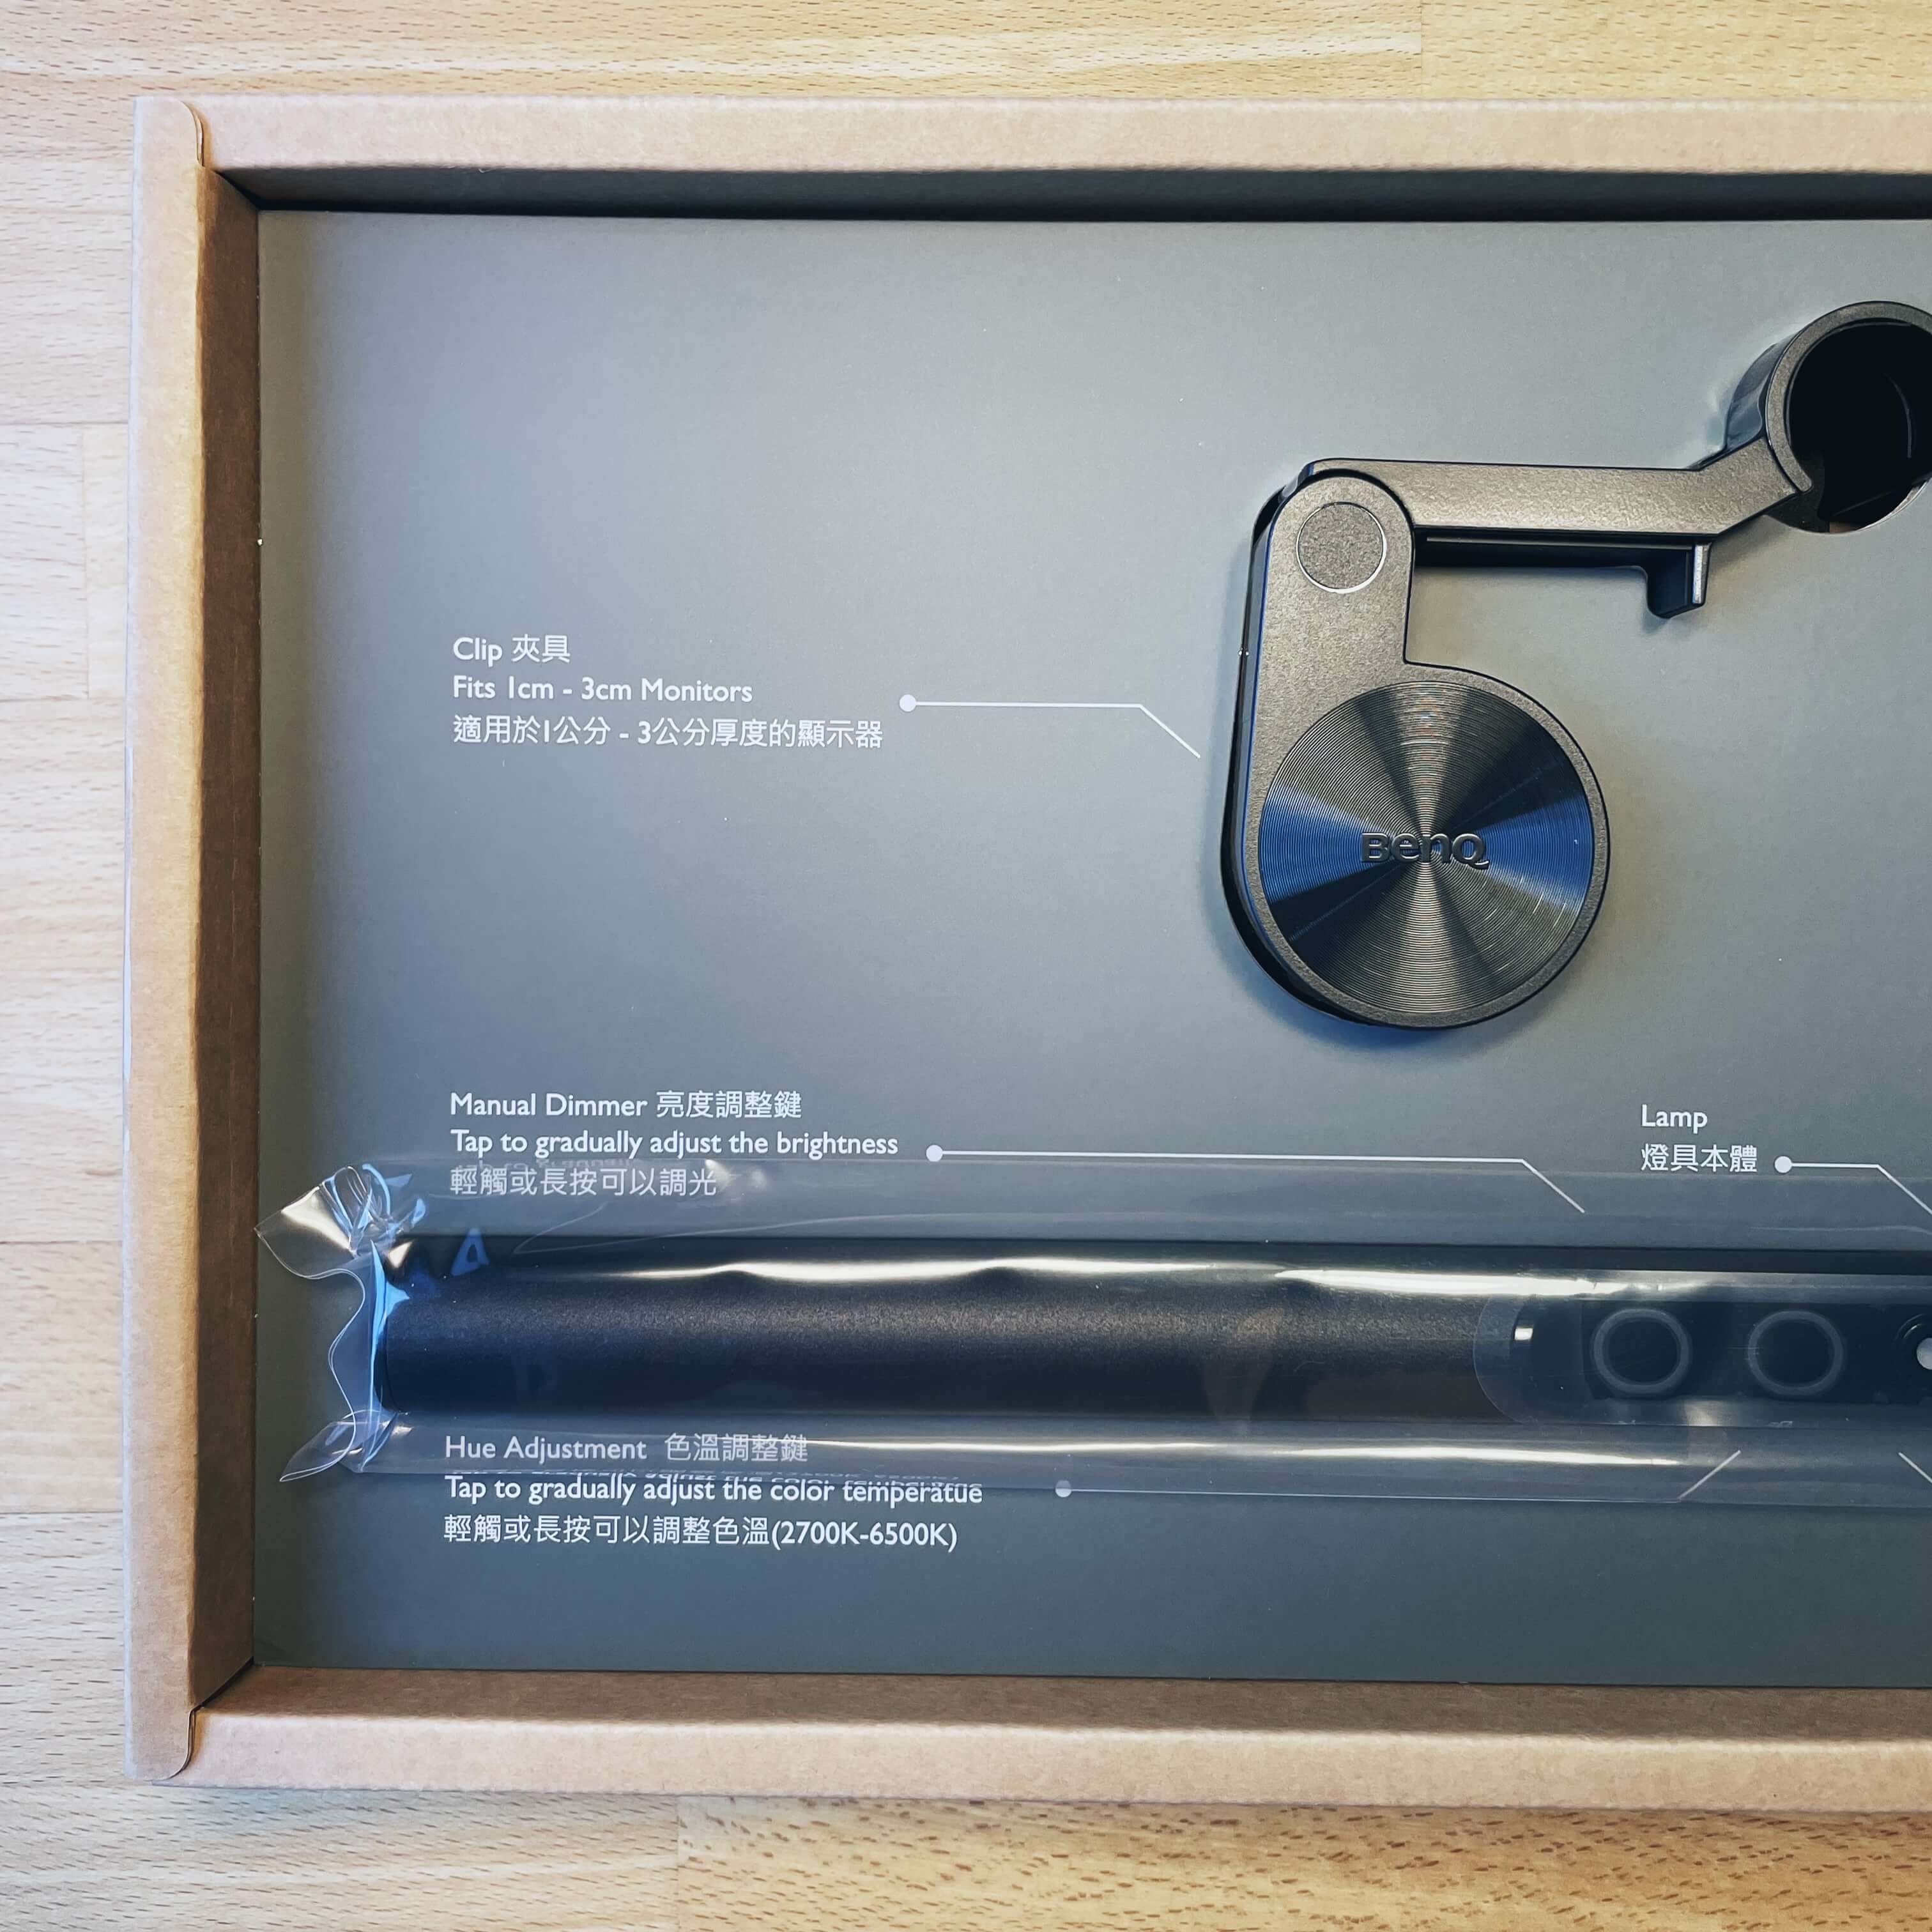 Photo showing a part of the internals of the packaging. The clip, the left side of the lamp and some packaging instructions are shown.